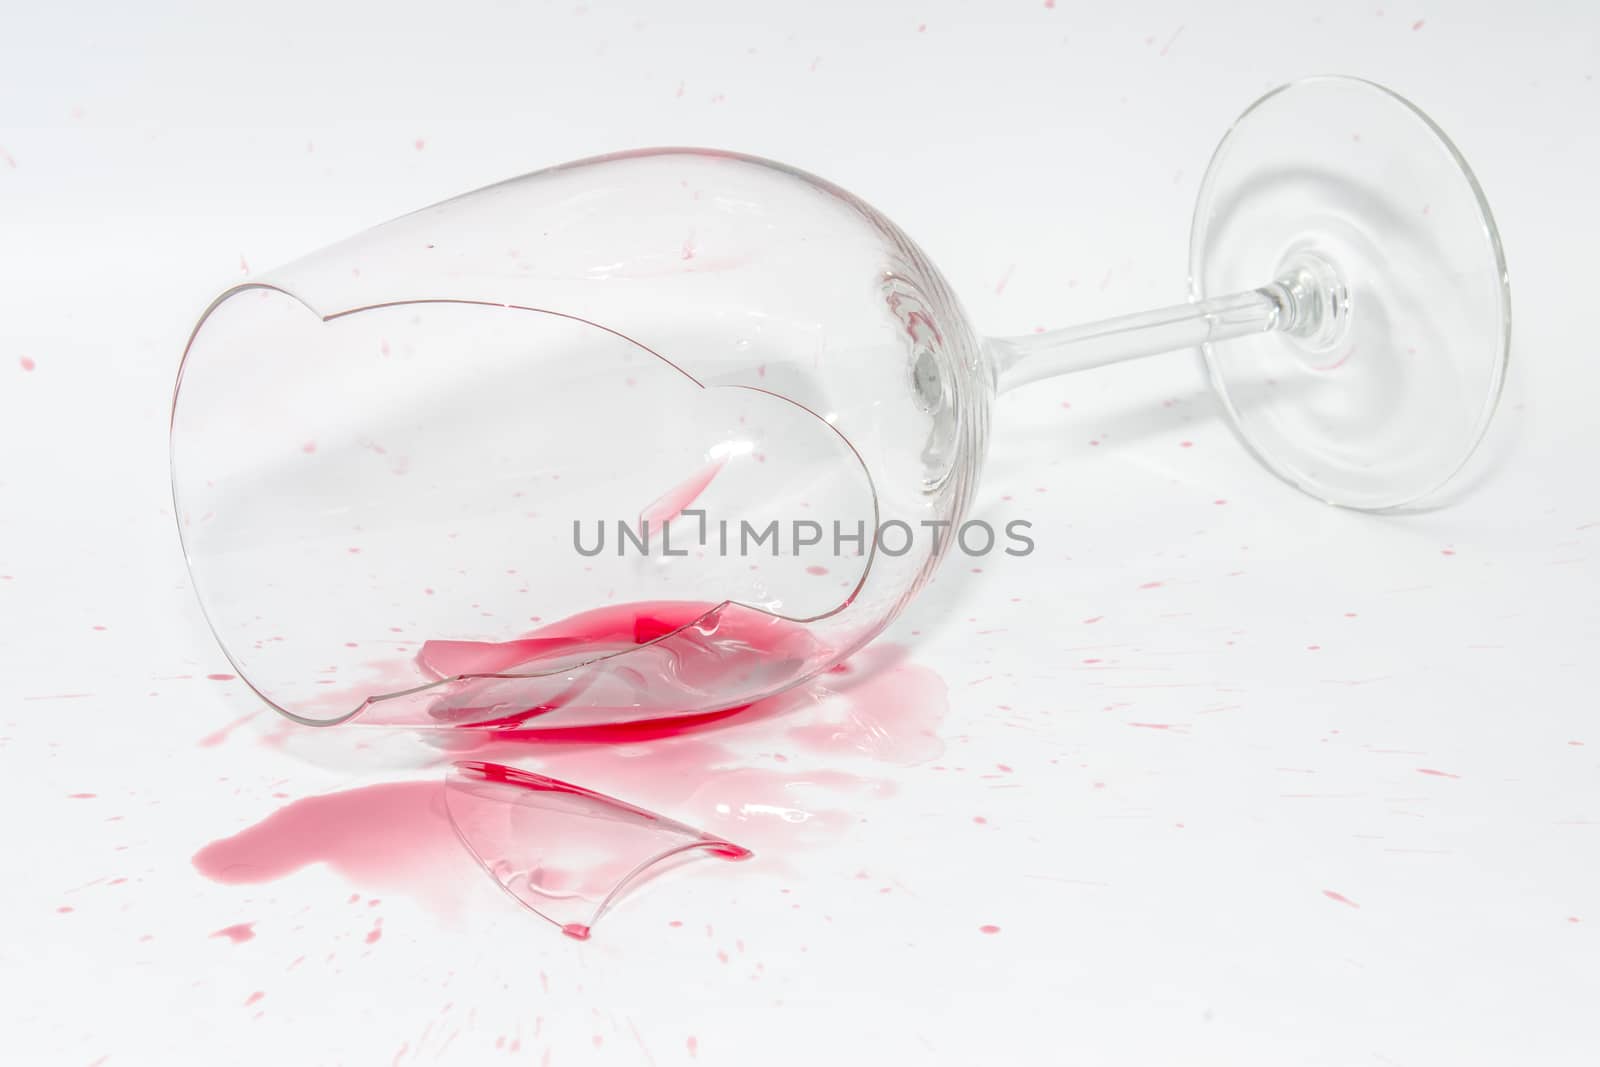 Broken wineglass with sharp shards and spilled splash of red wine on white background